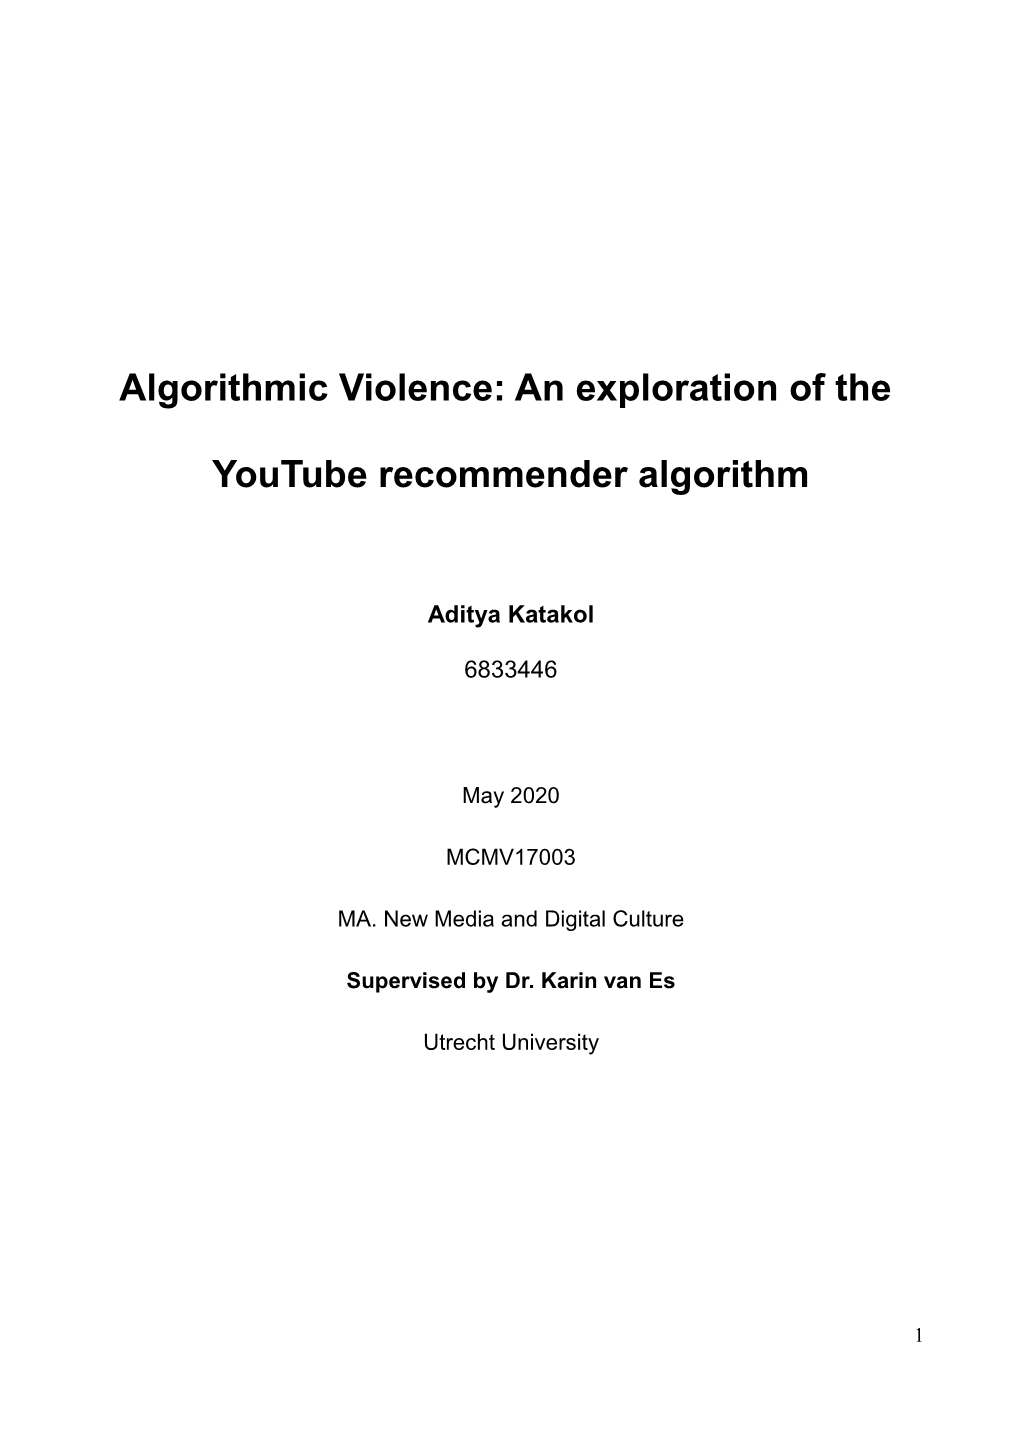 Algorithmic Violence: an Exploration of the Youtube Recommender